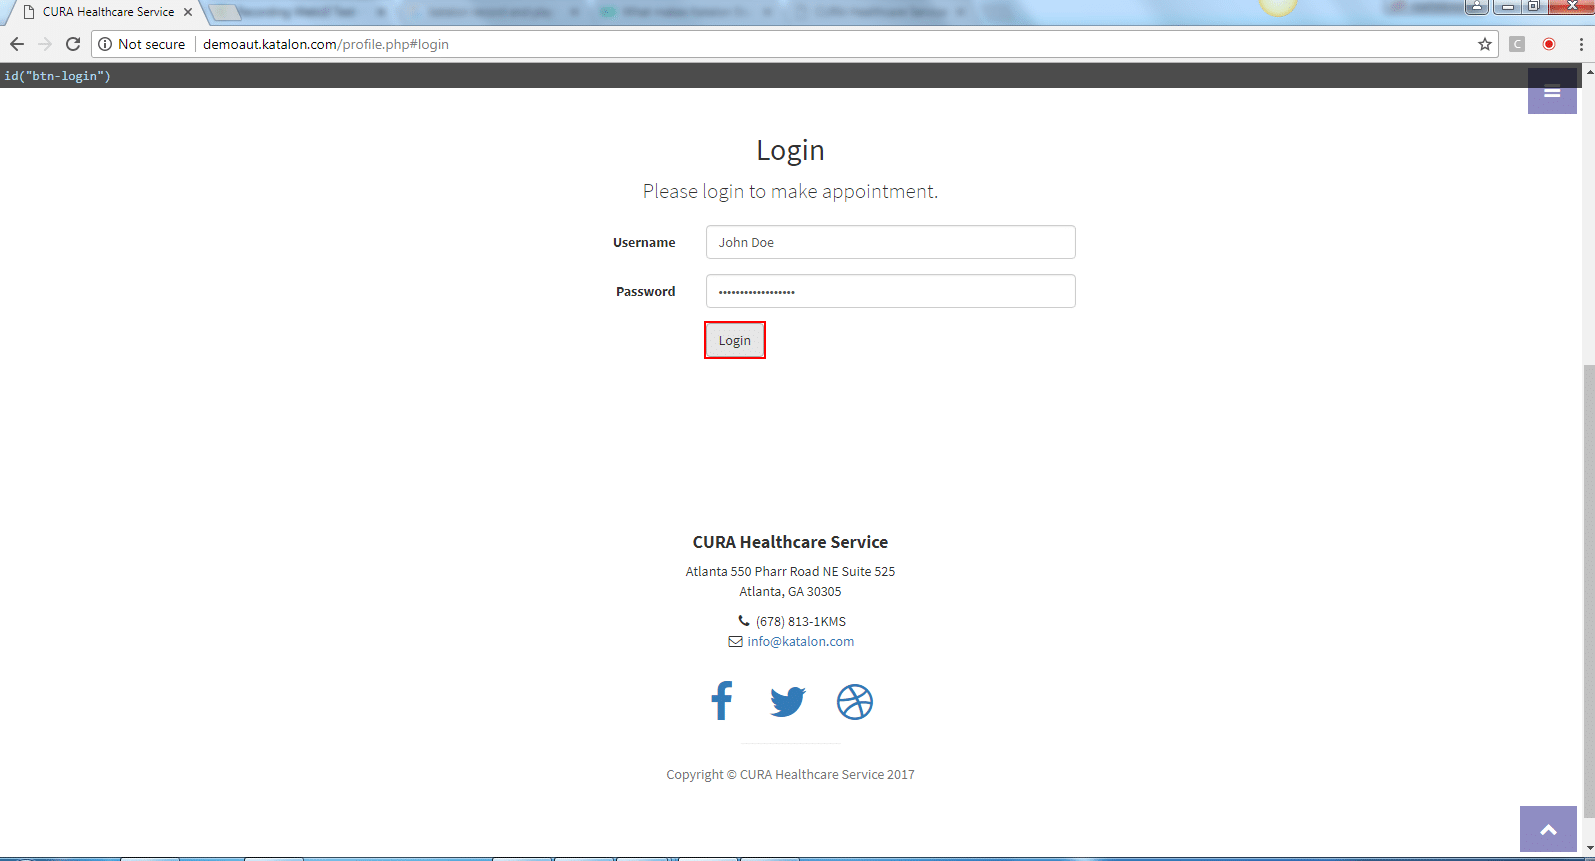 move the cursor to Login Button and click on Login Button